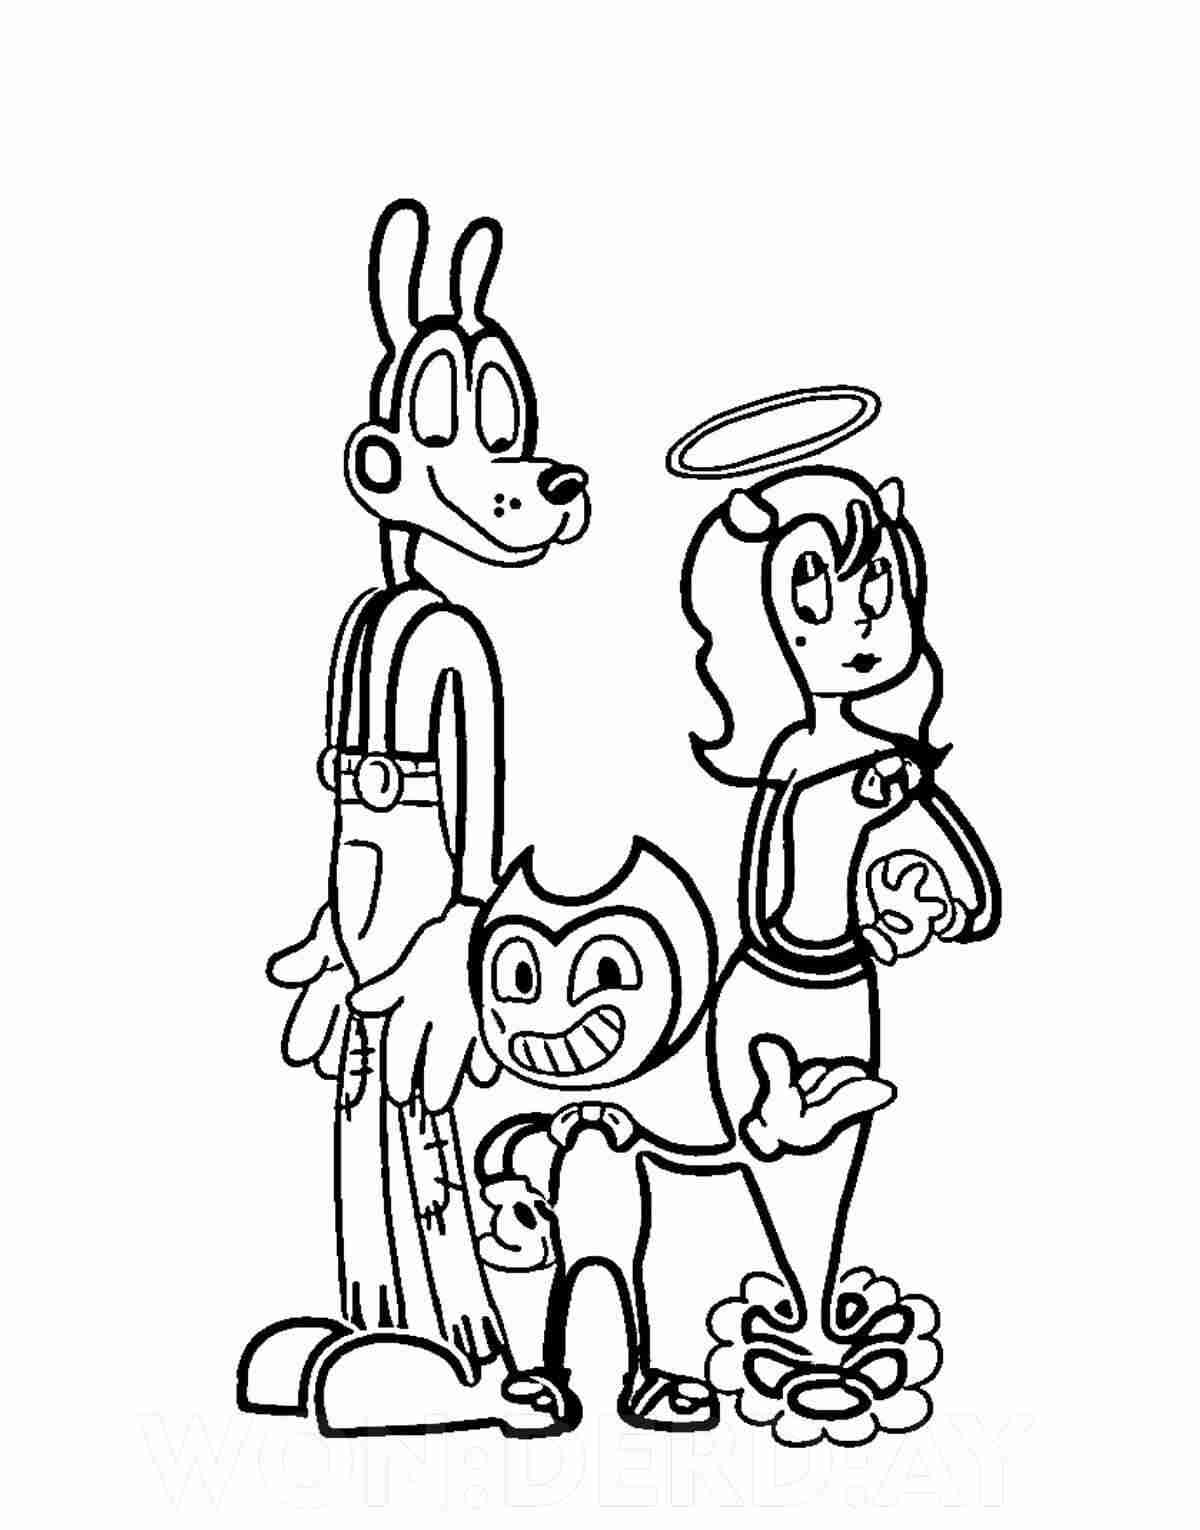 Family of Bendy, Boris the Wolf and Alice Angle from Bendy and the Ink Machine Coloring Pages